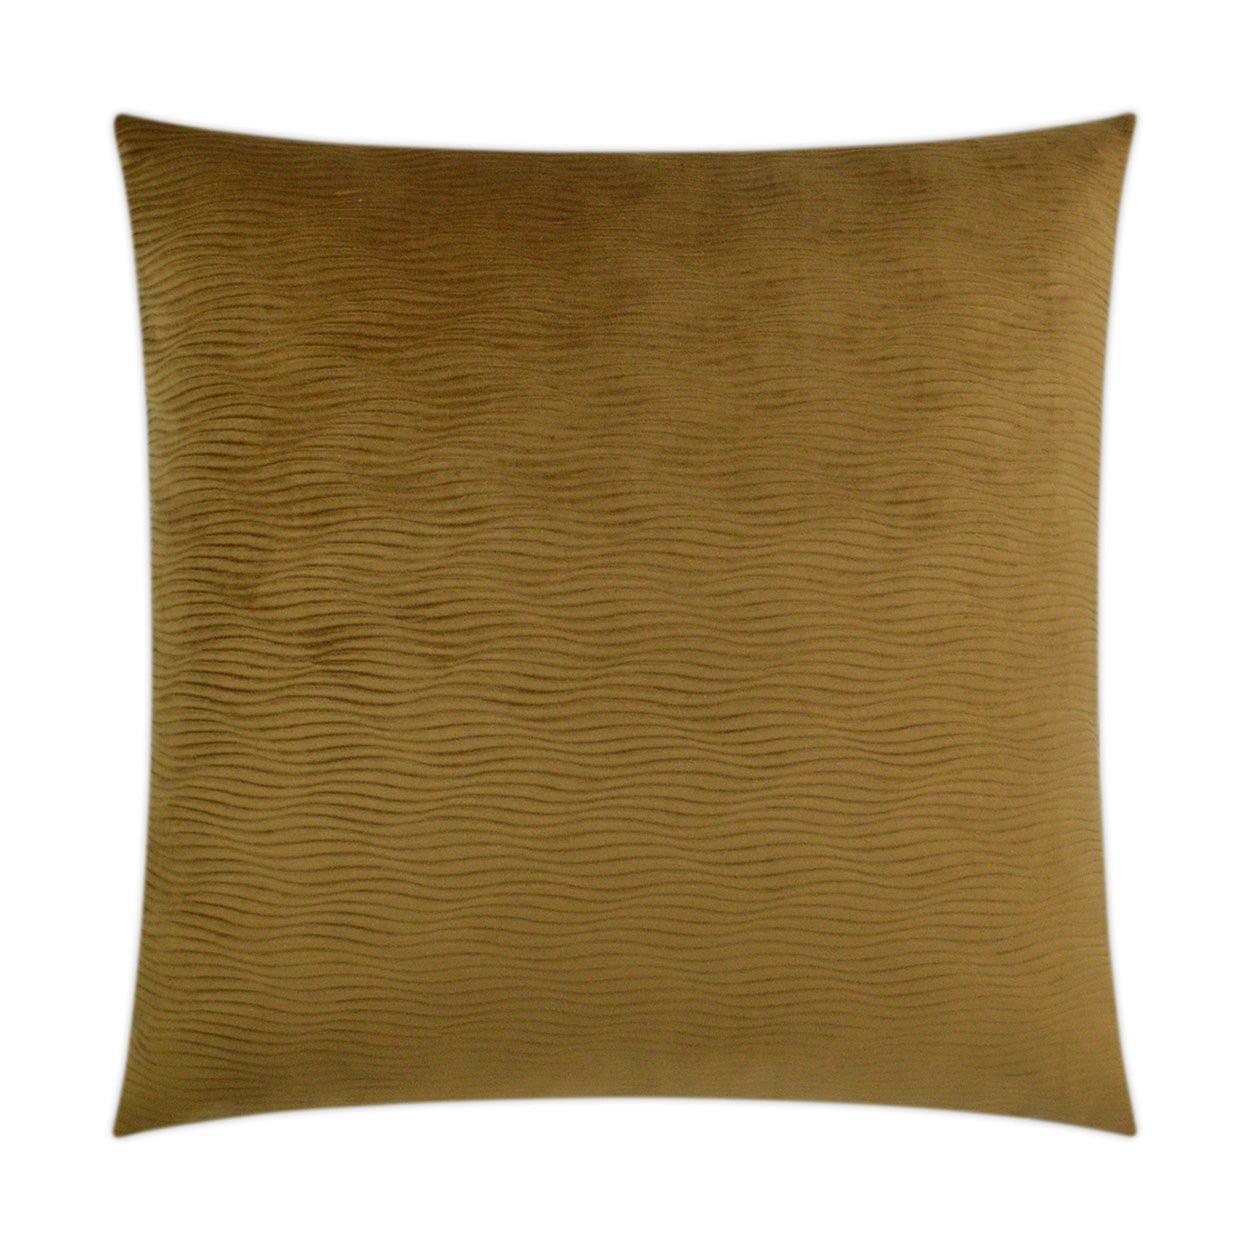 Stream Walnut Solid Tan Taupe Large Throw Pillow With Insert - Uptown Sebastian